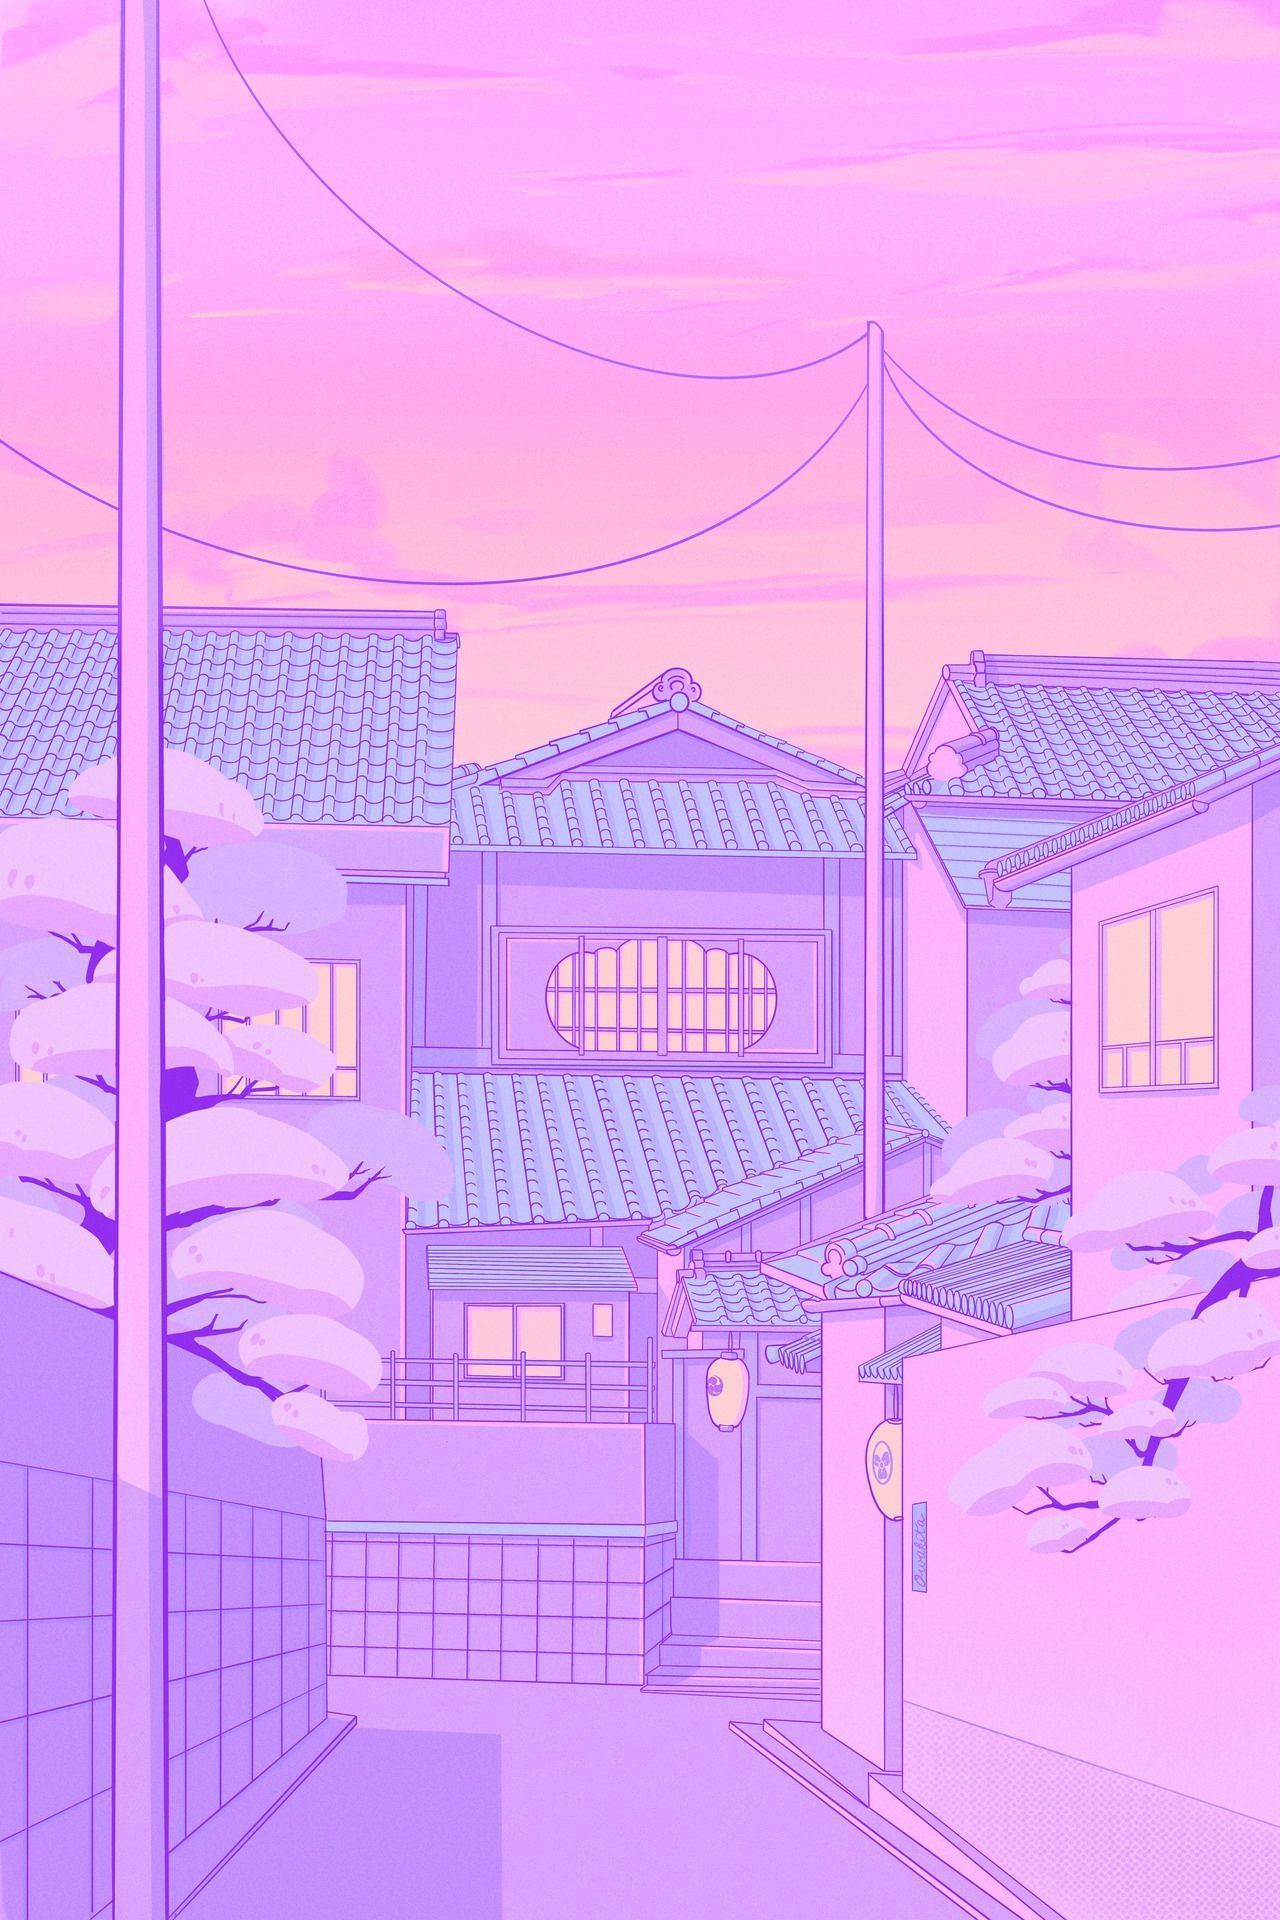 A purple and pink city street - Anime landscape